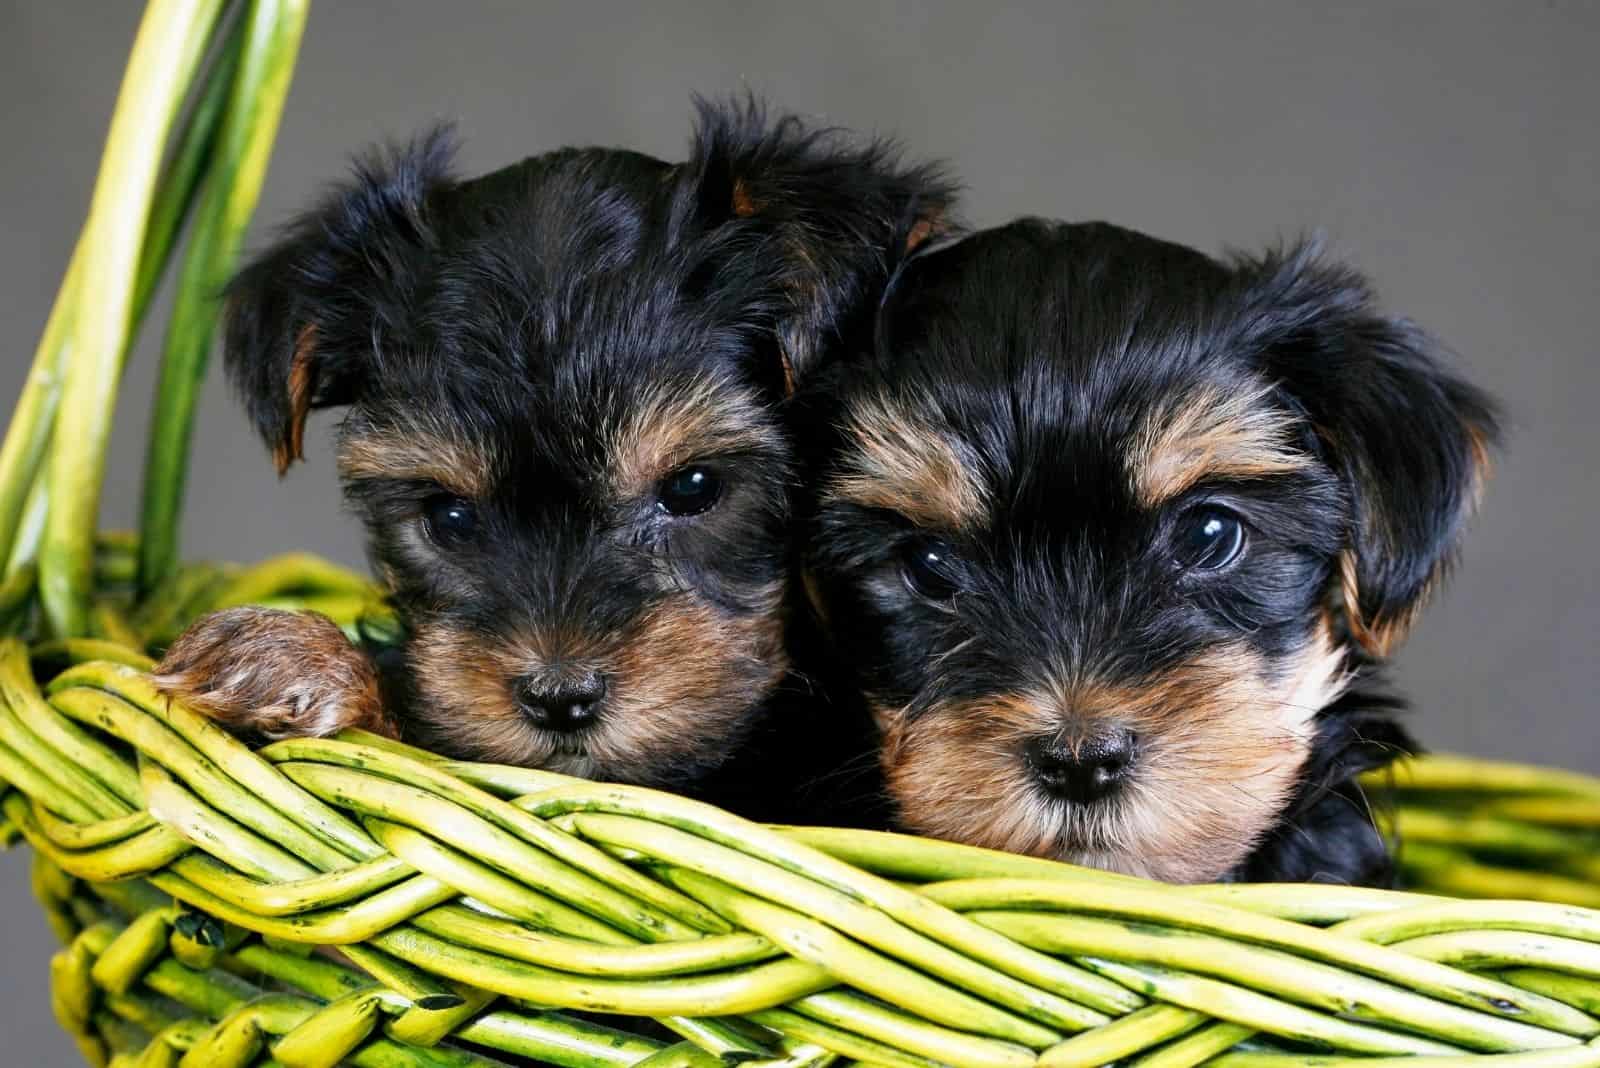 two yorkshire puppies inside the green basket